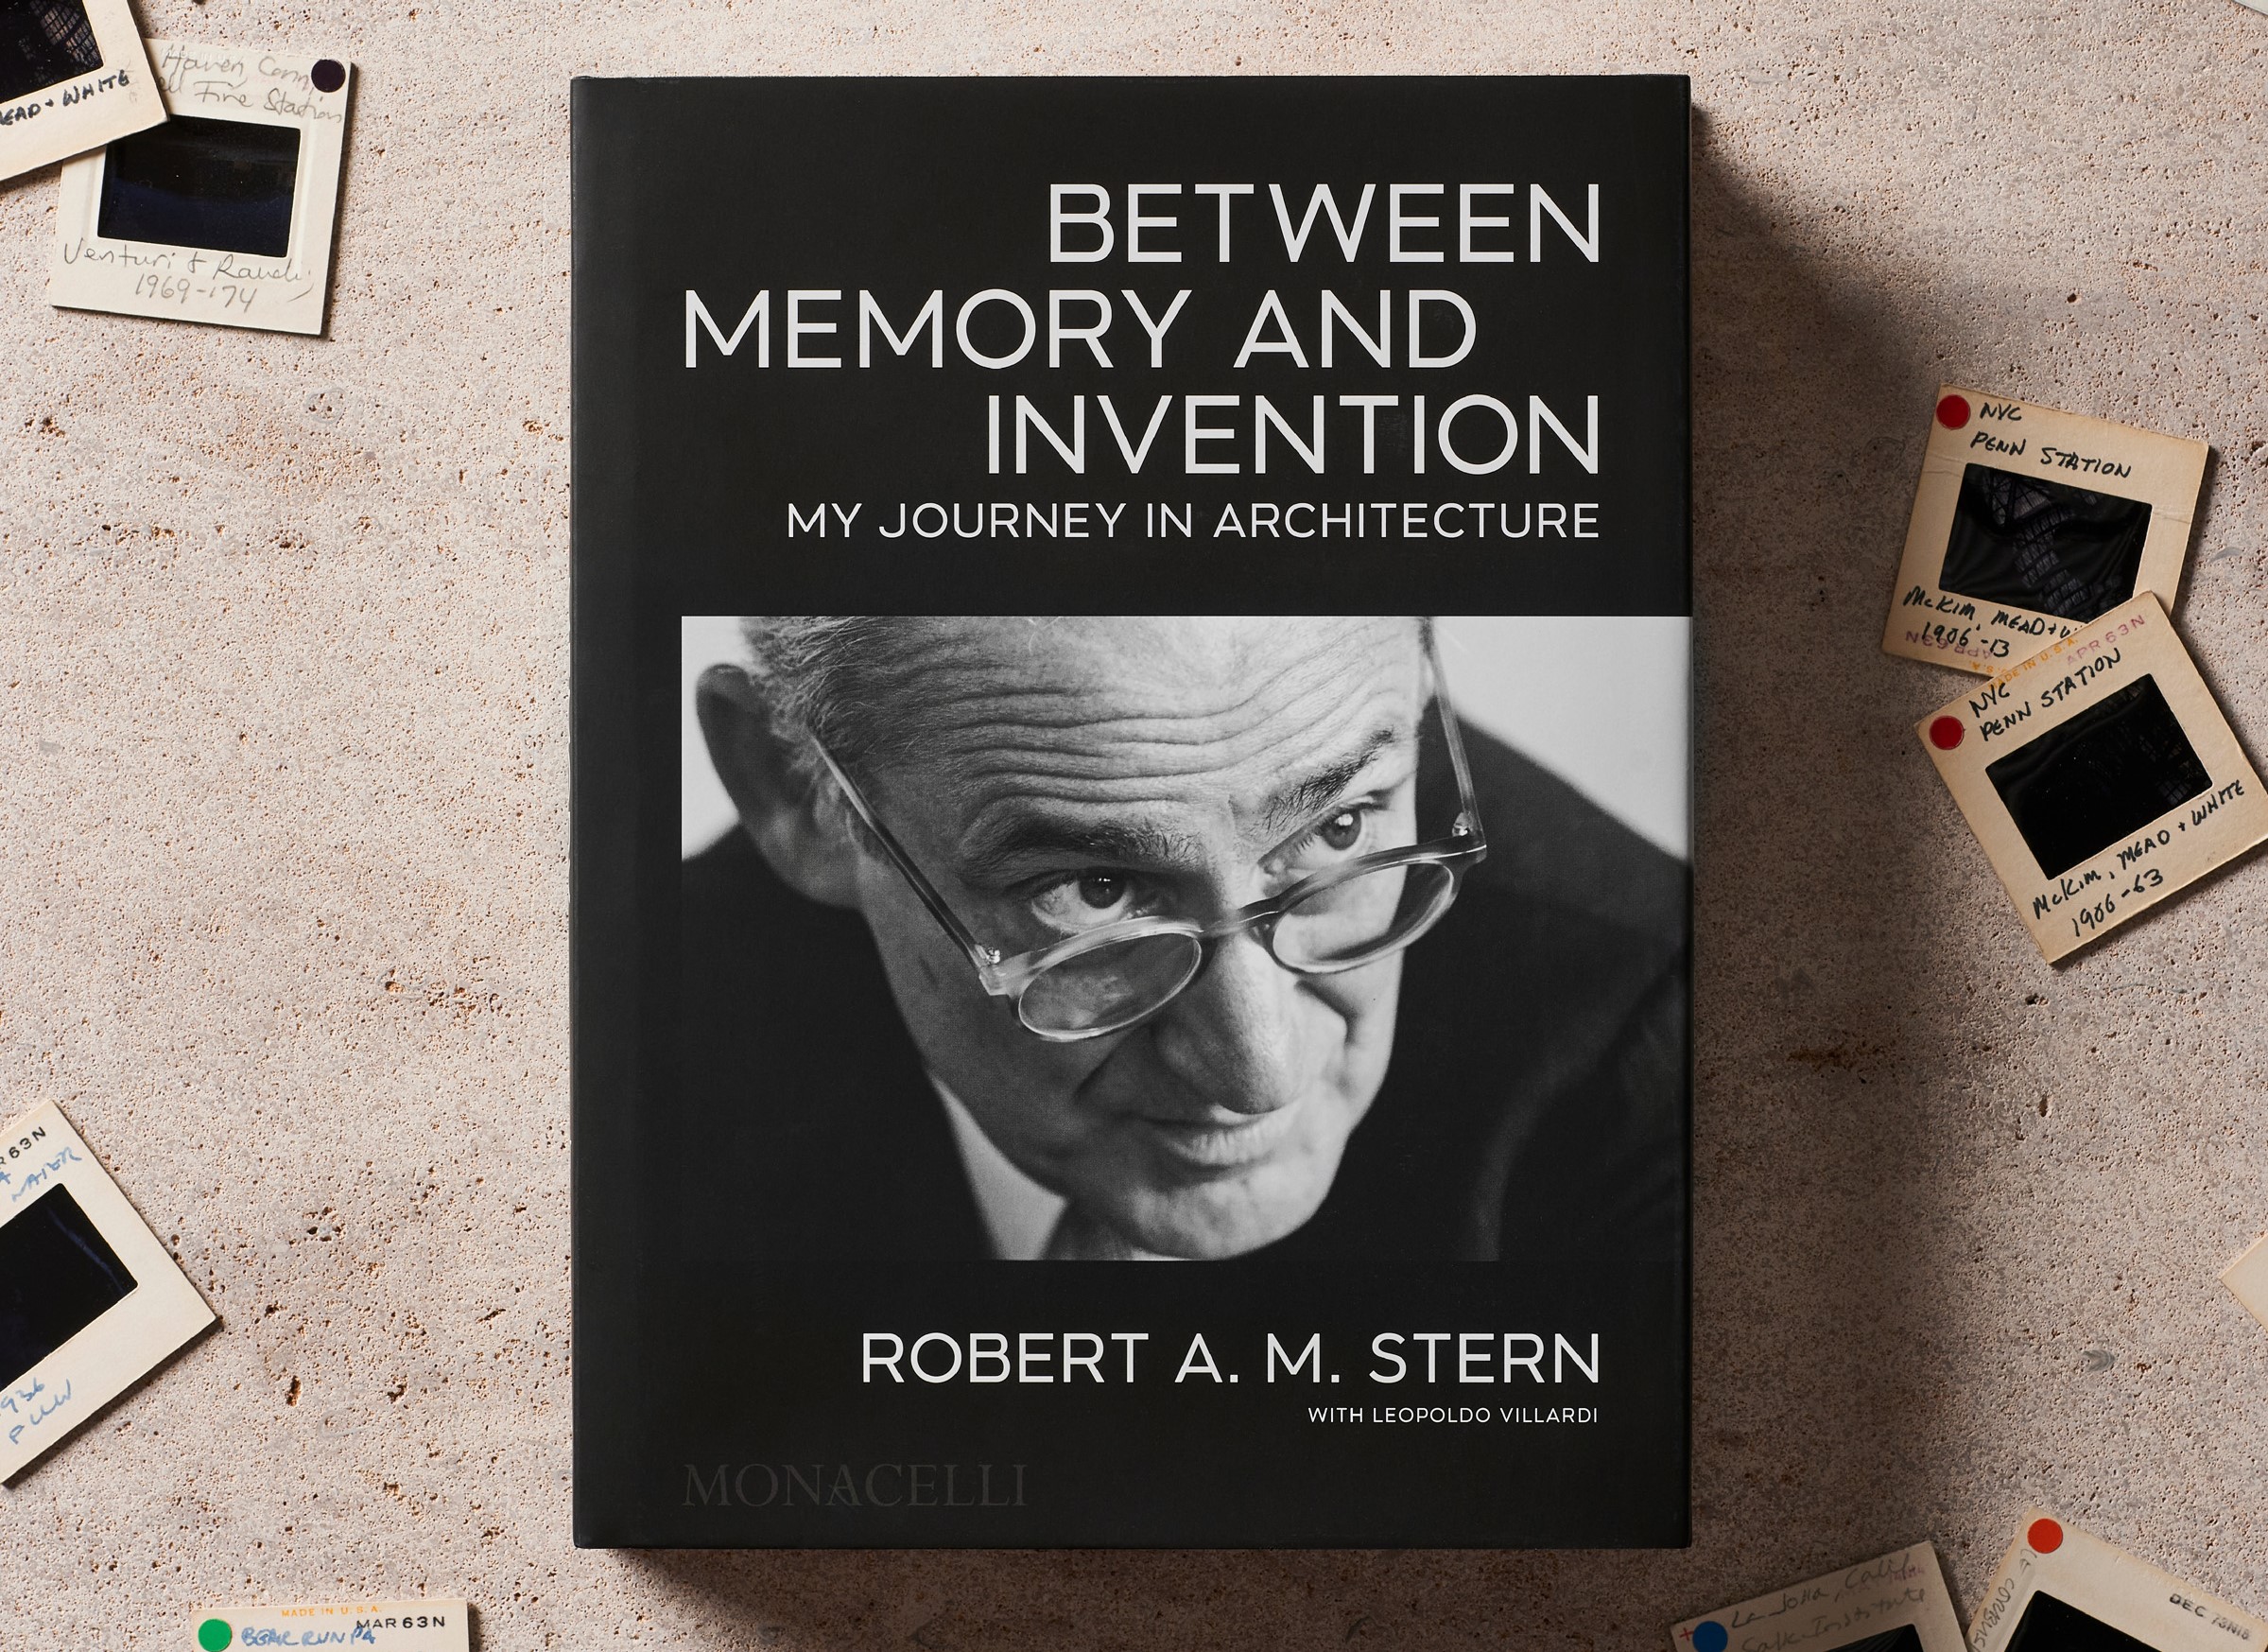 Robert A. M. Stern’s Journey in Architecture: A Conversation with Francis Morrone